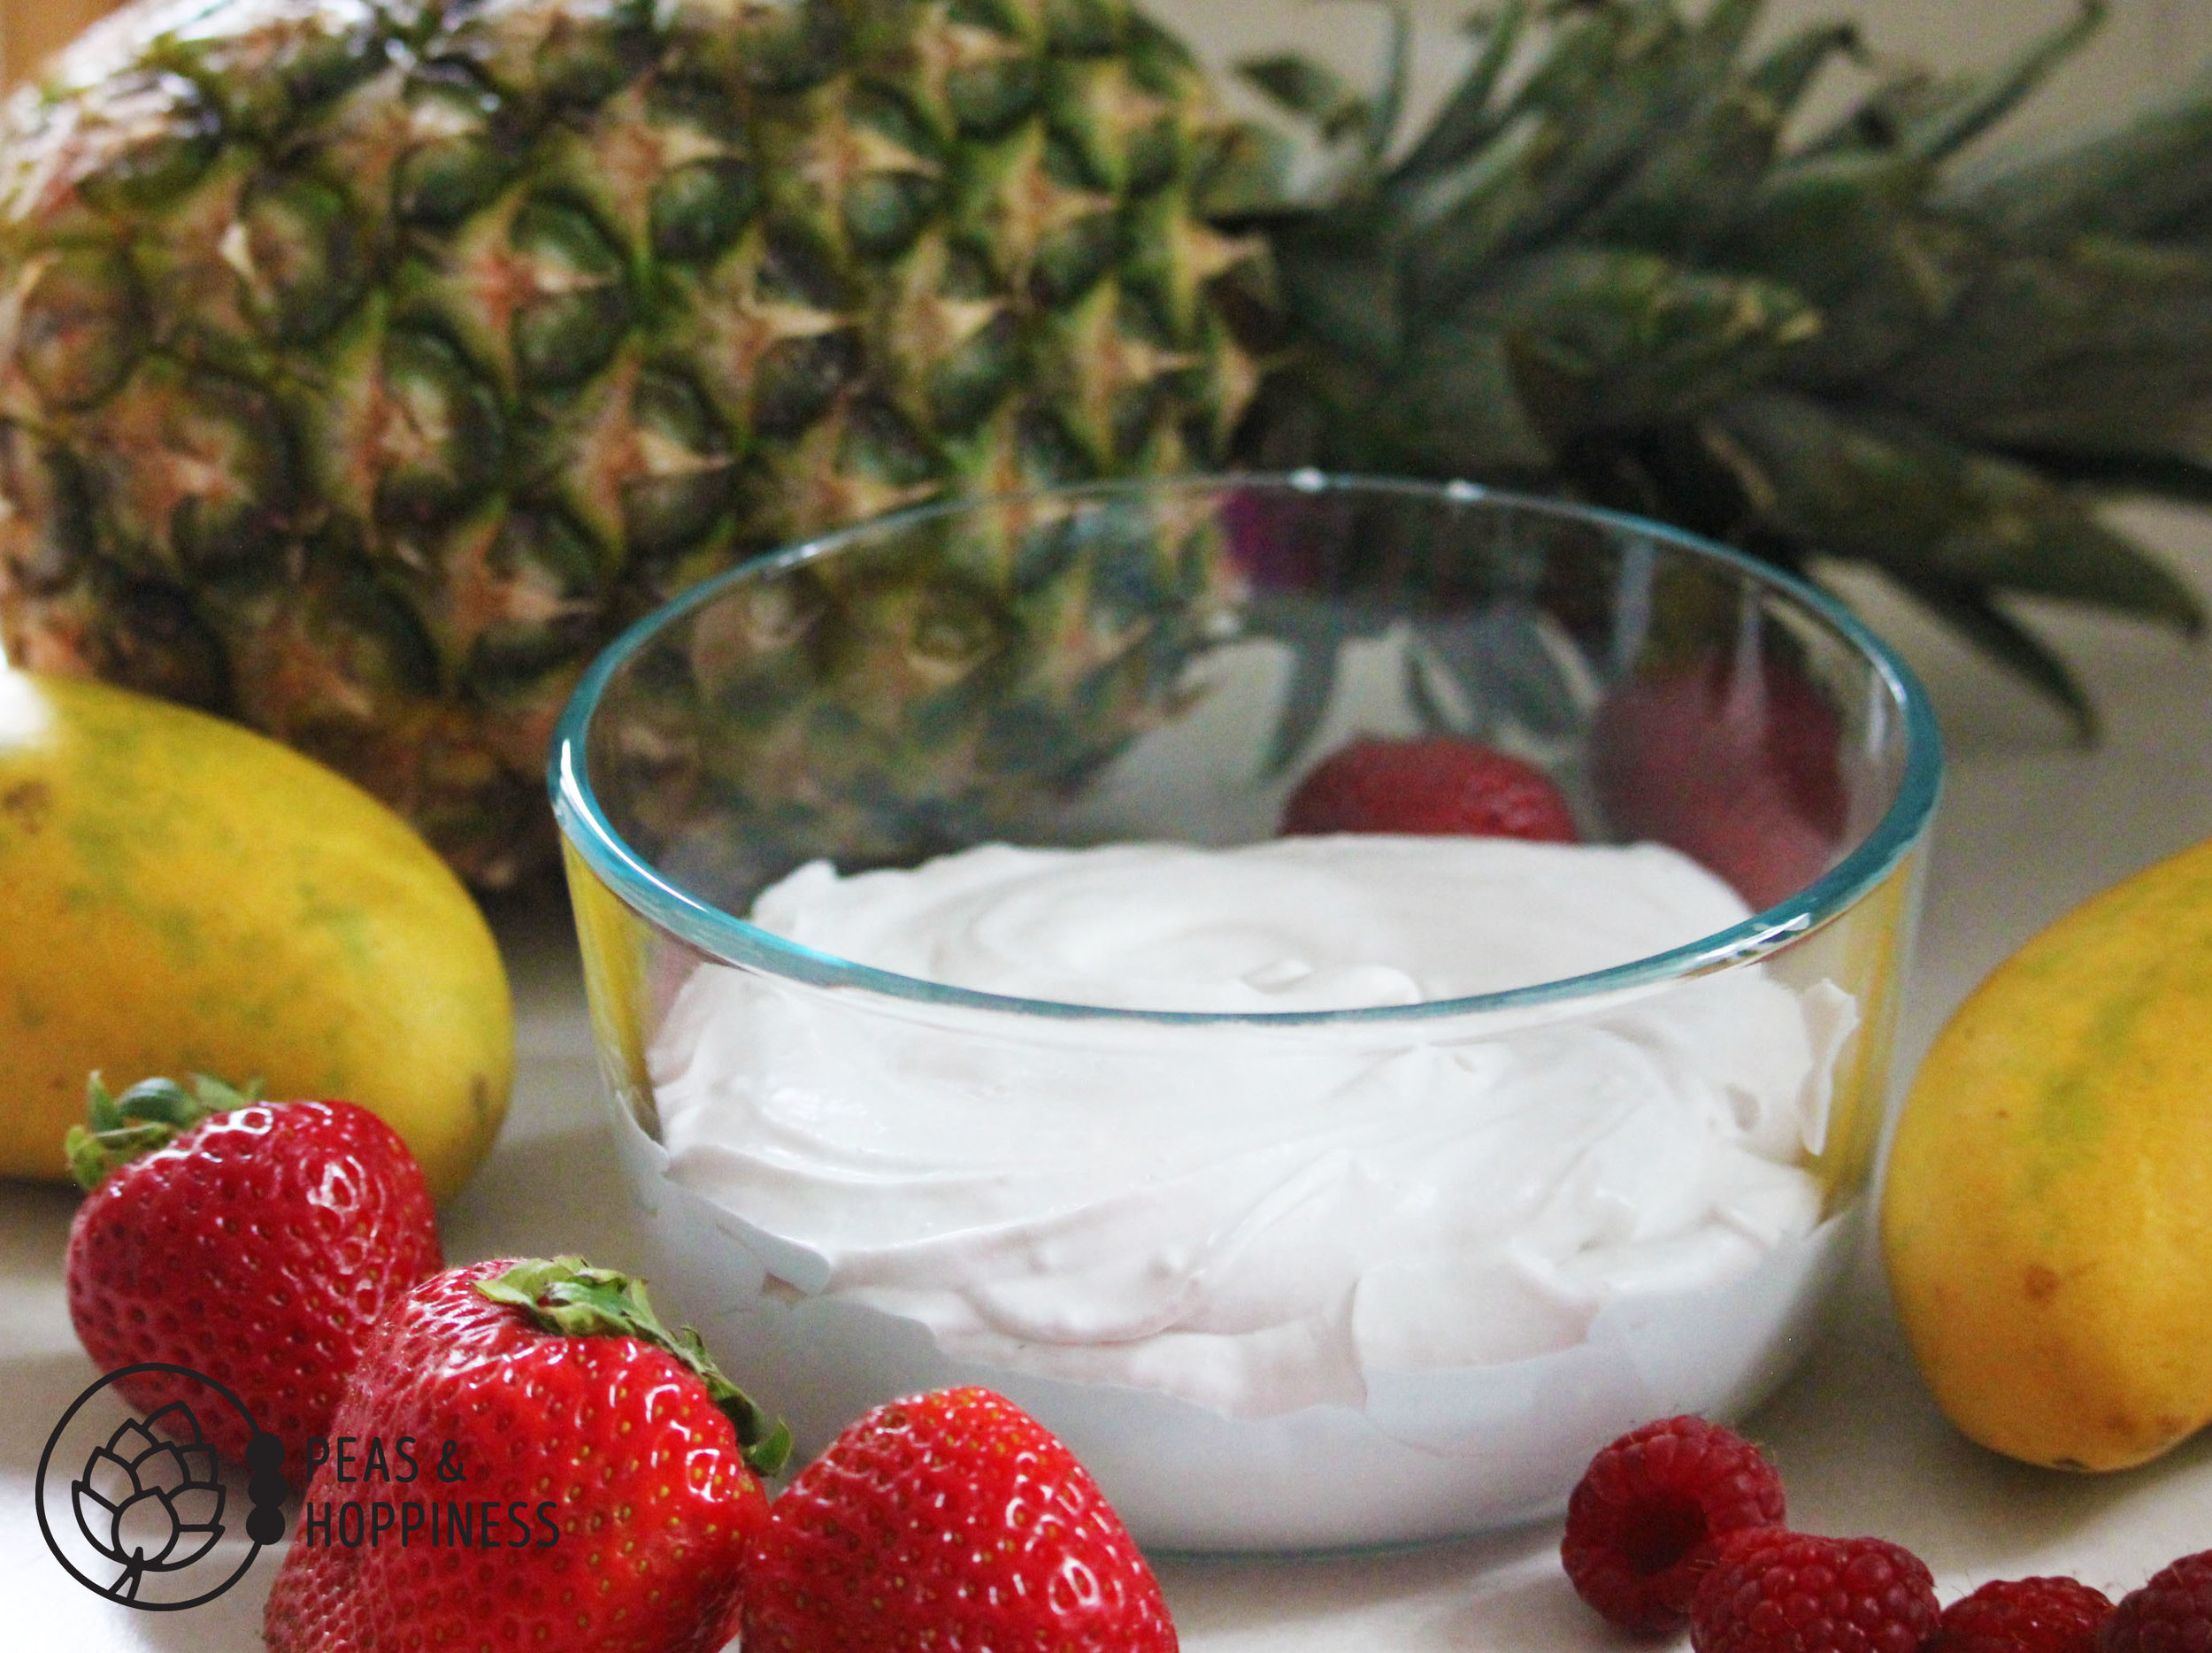 Dairy Free Pina Colada Fruit Dip from Peas and Hoppiness - www.peasandhoppiness.com